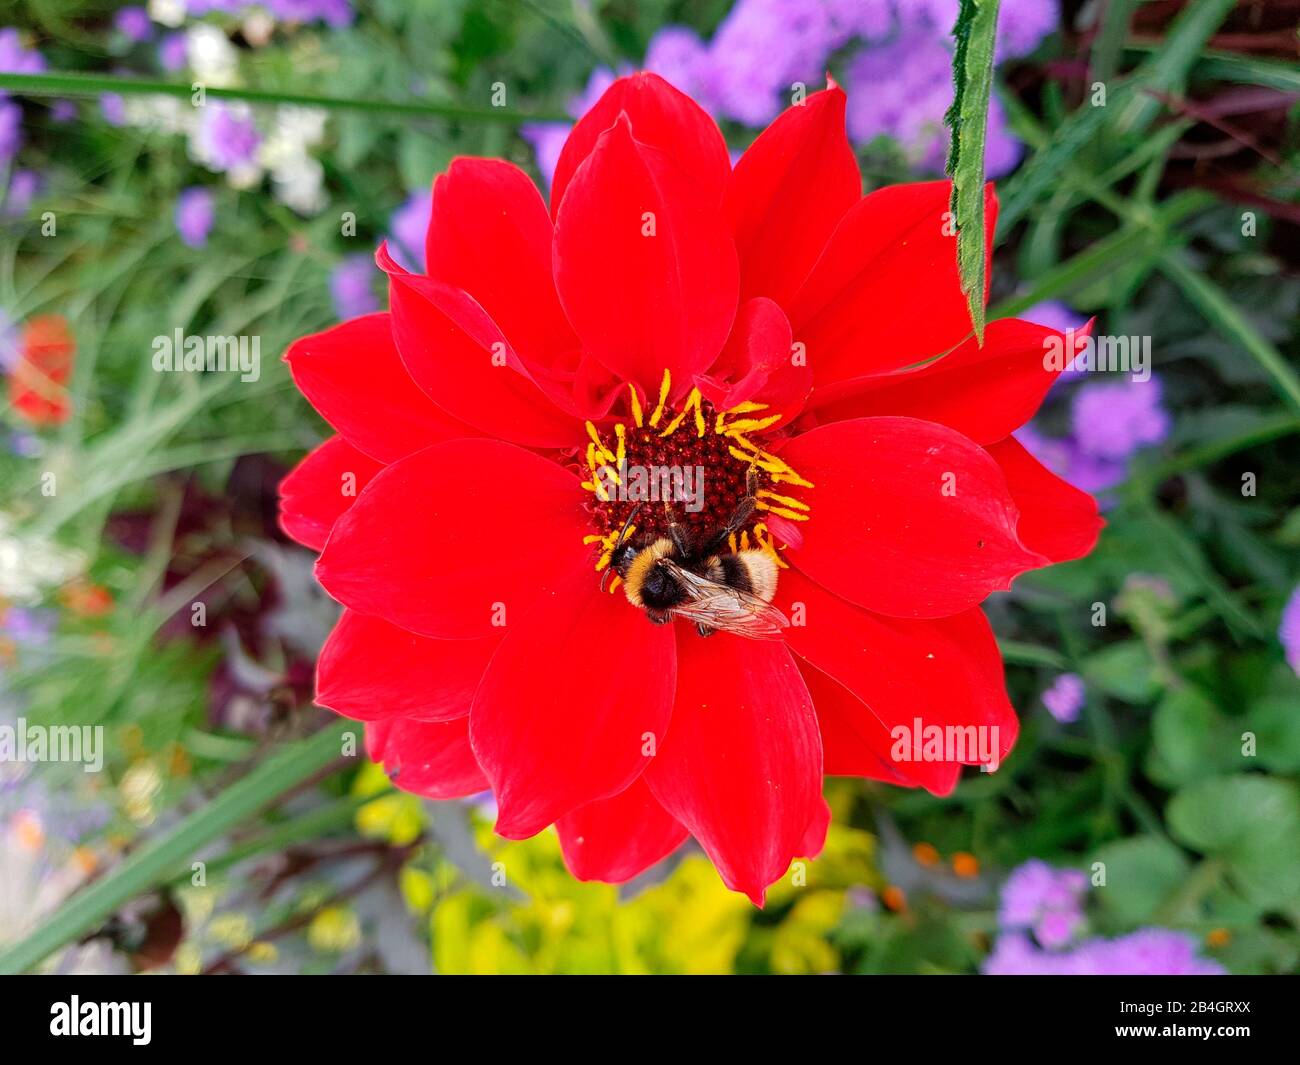 Red Aster, close-up view Stock Photo